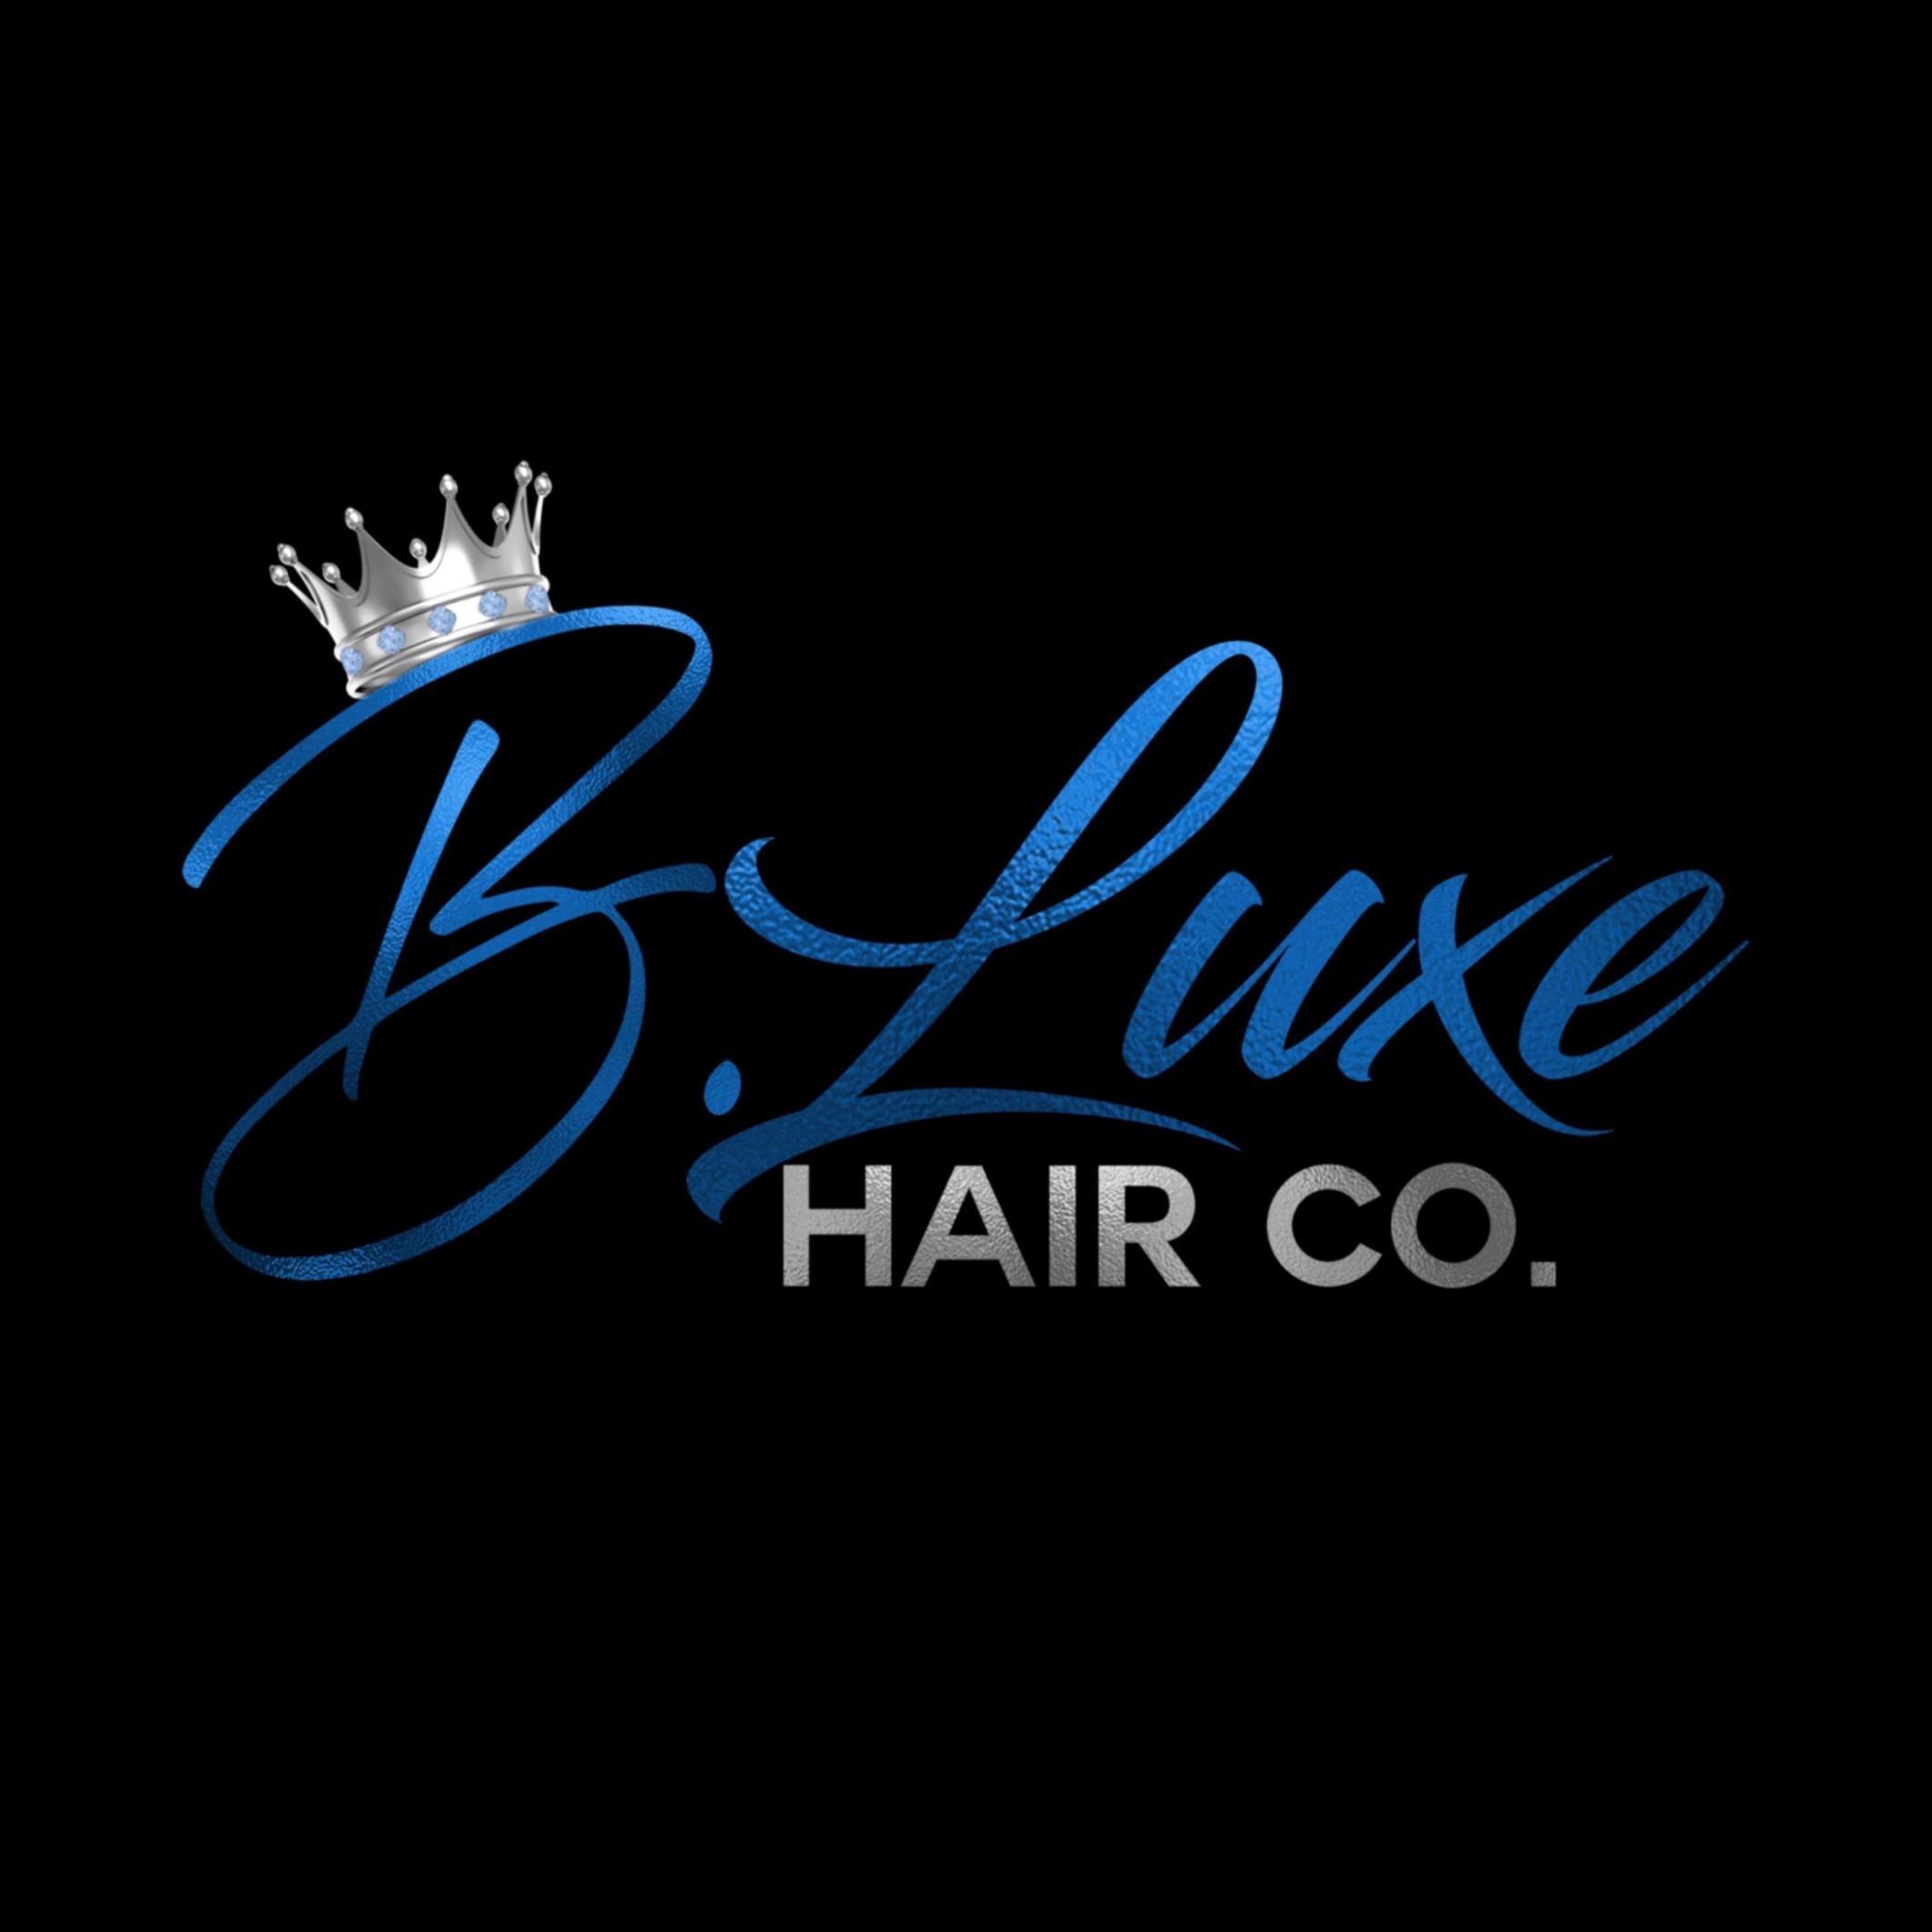 B. Luxe Hair Co., 3900 Commerce St, 104, Dallas, 75226